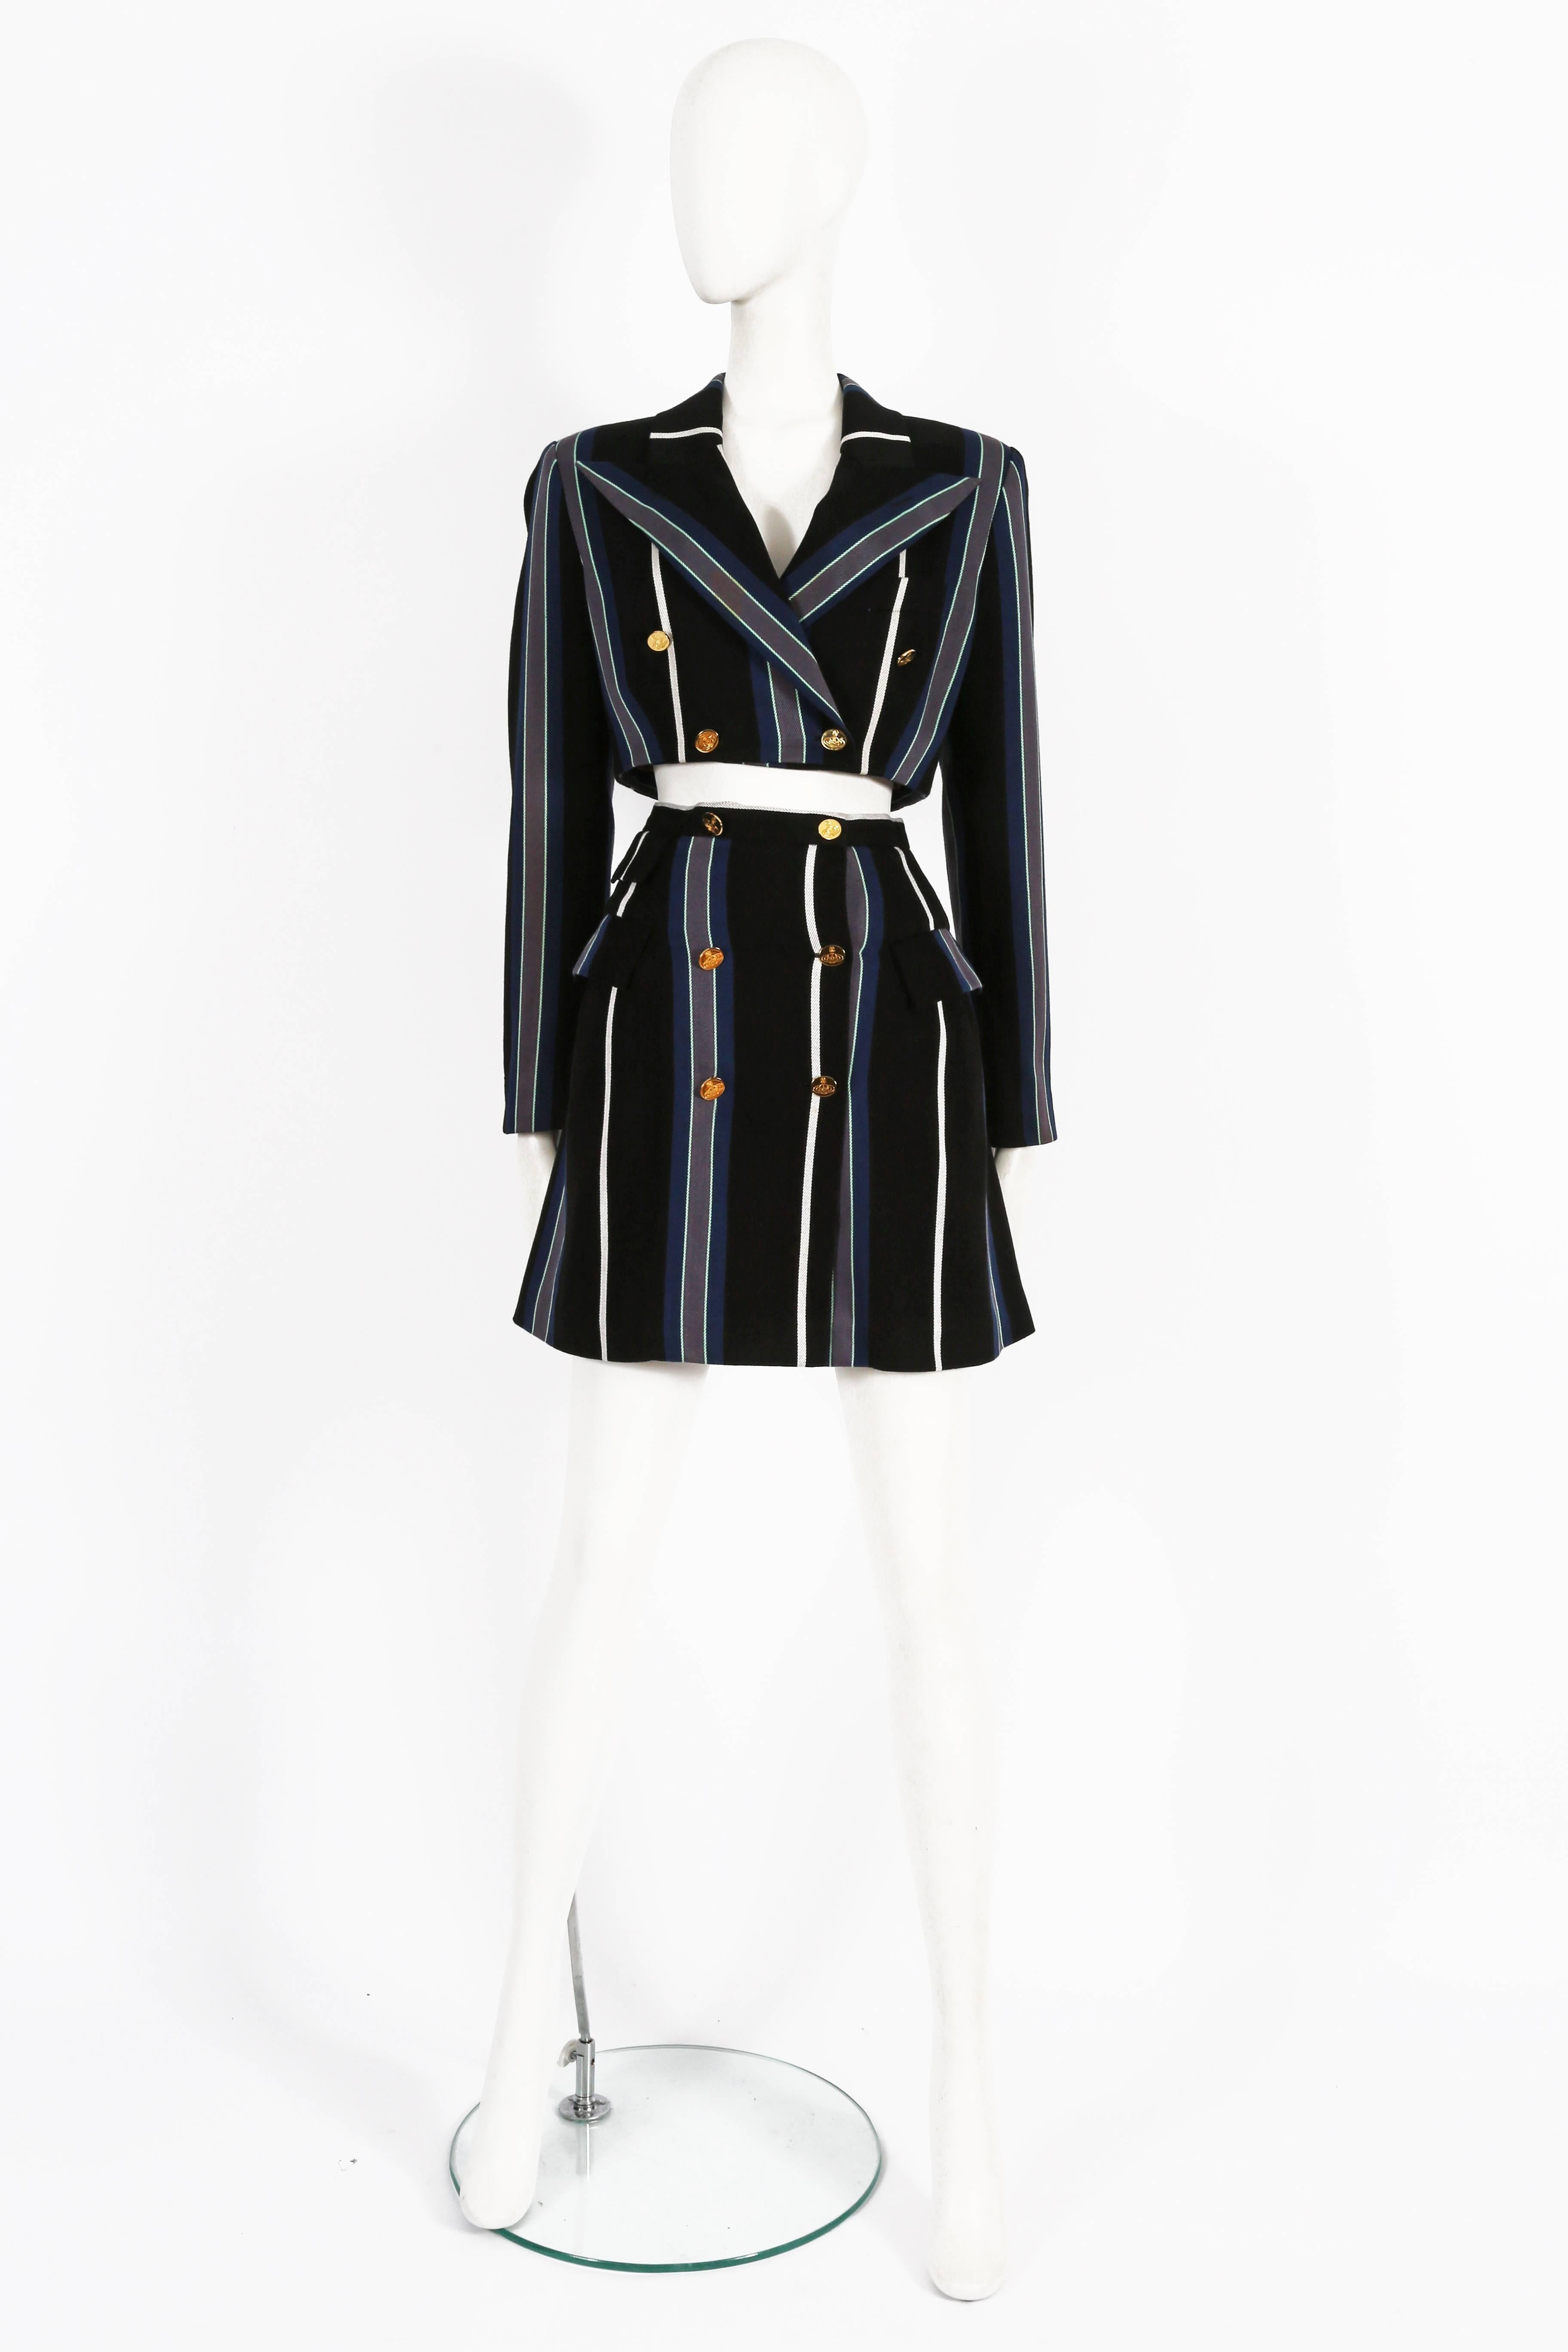 A rare Vivienne Westwood skirt suit, Spring-Summer 1995. The suit is constructed in a striped tweed throughout with satin lining. The jacket is double breasted and closes with gold-tone Westwood orb buttons. The high-waisted skirt has a built boning